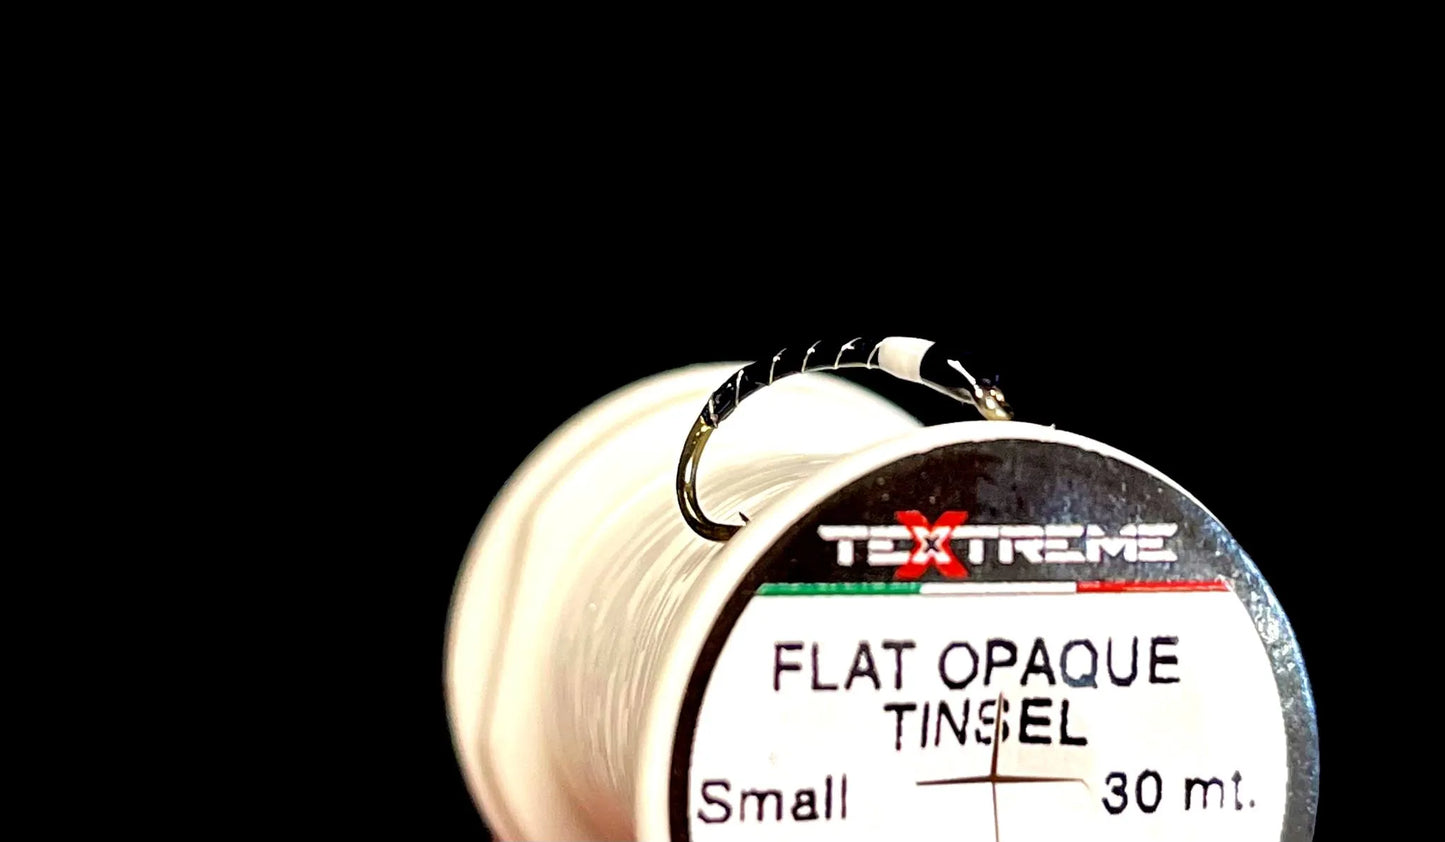 Textreme Flat Opaque Tinsel